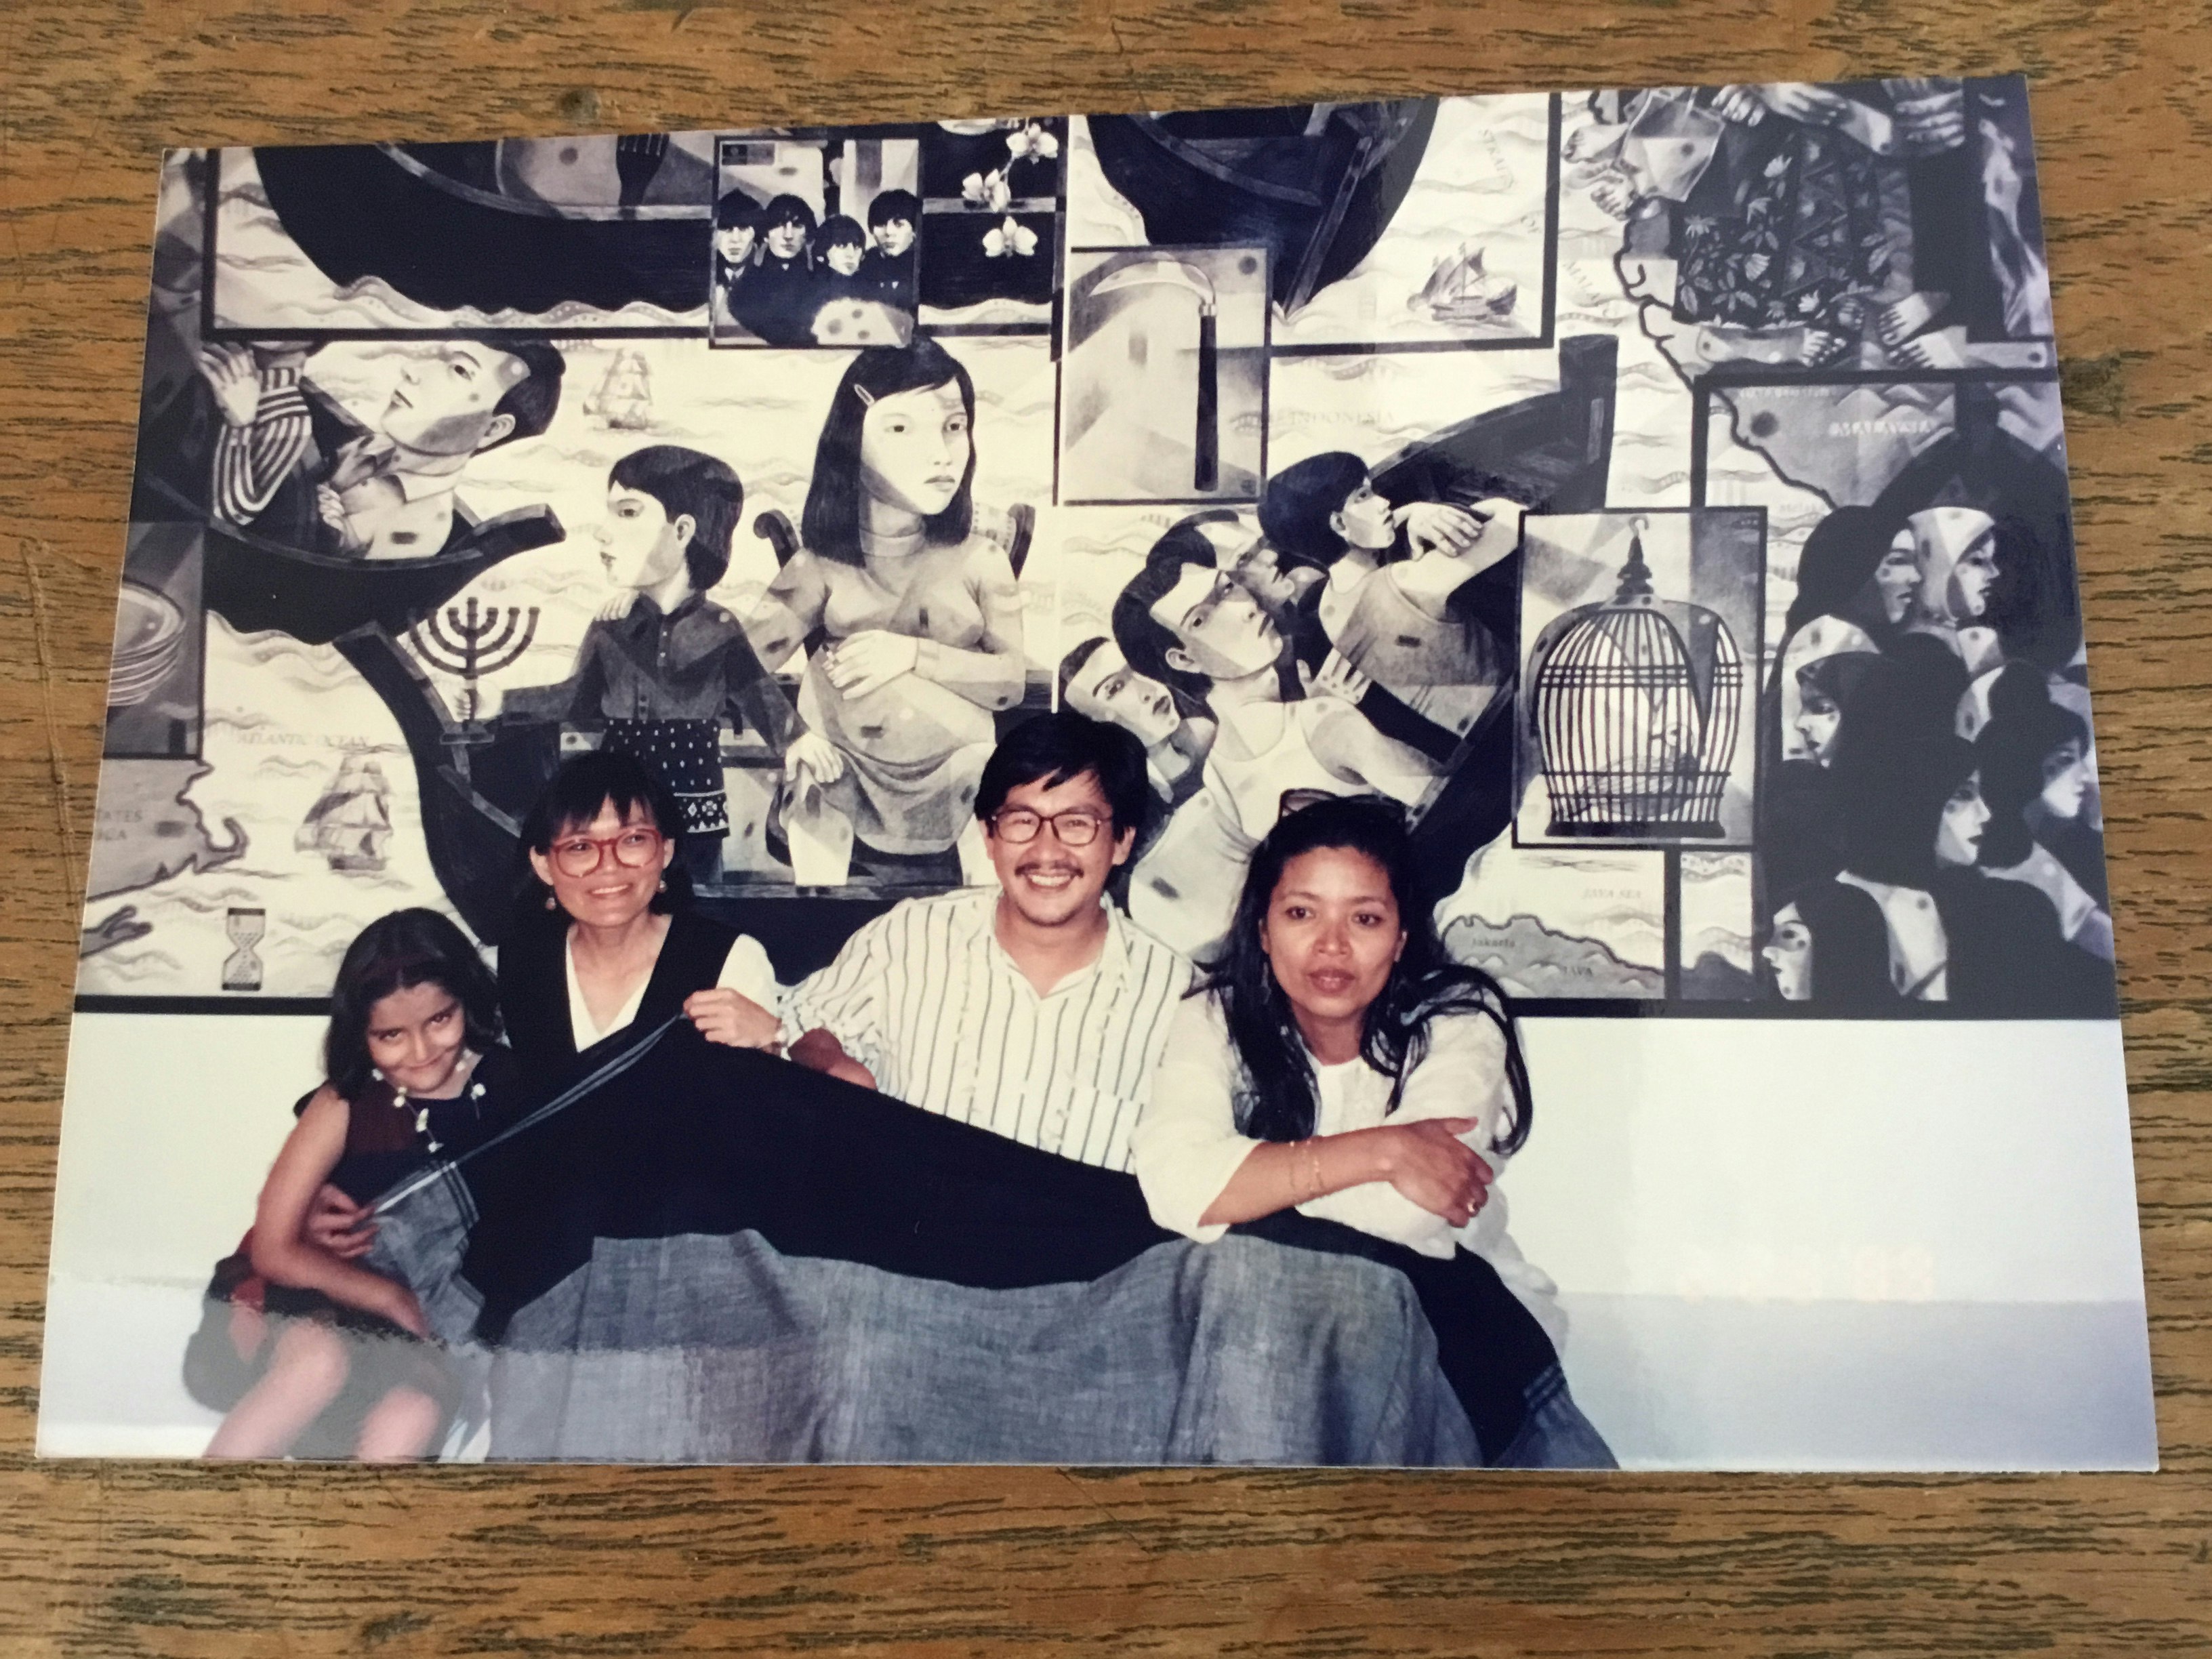 Print photo of a child, two women and a man in front of a black-and-white artwork